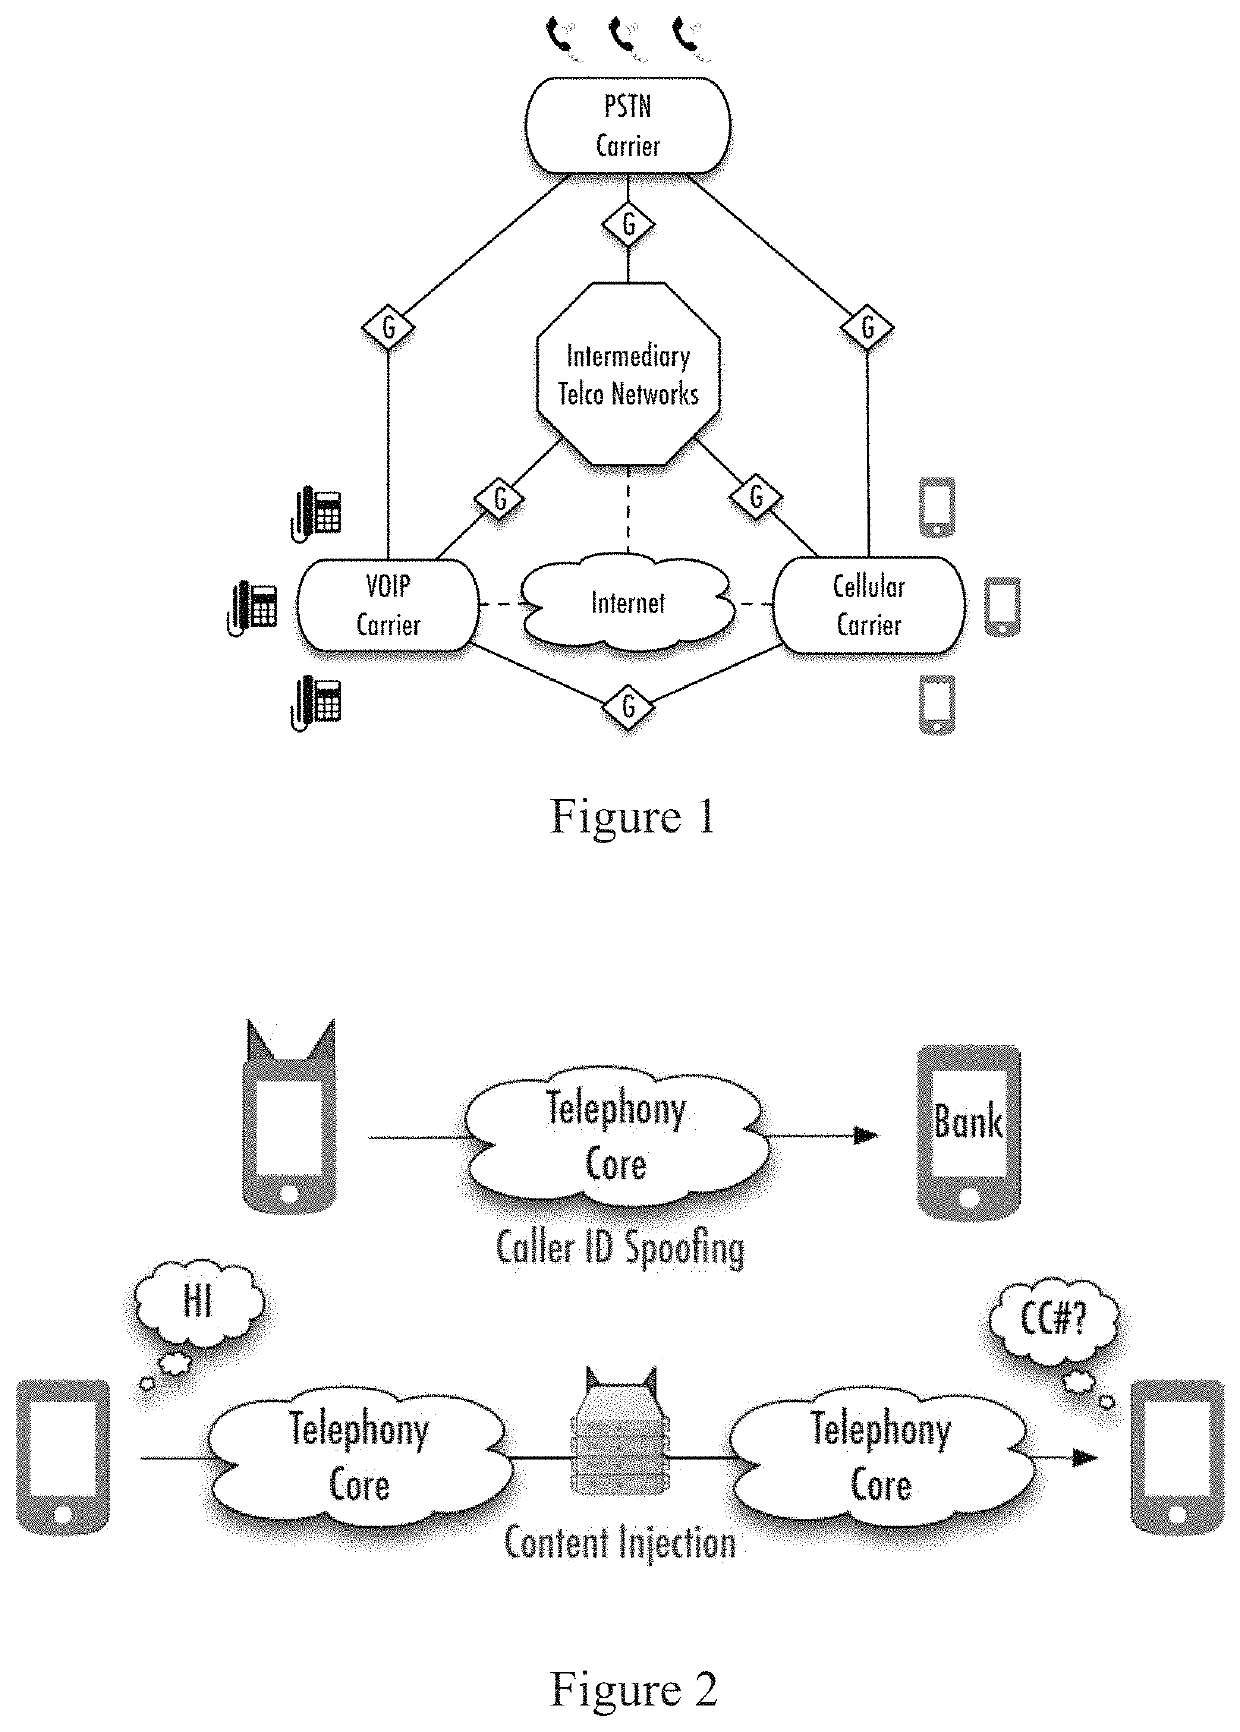 Identity and content authentication for phone calls